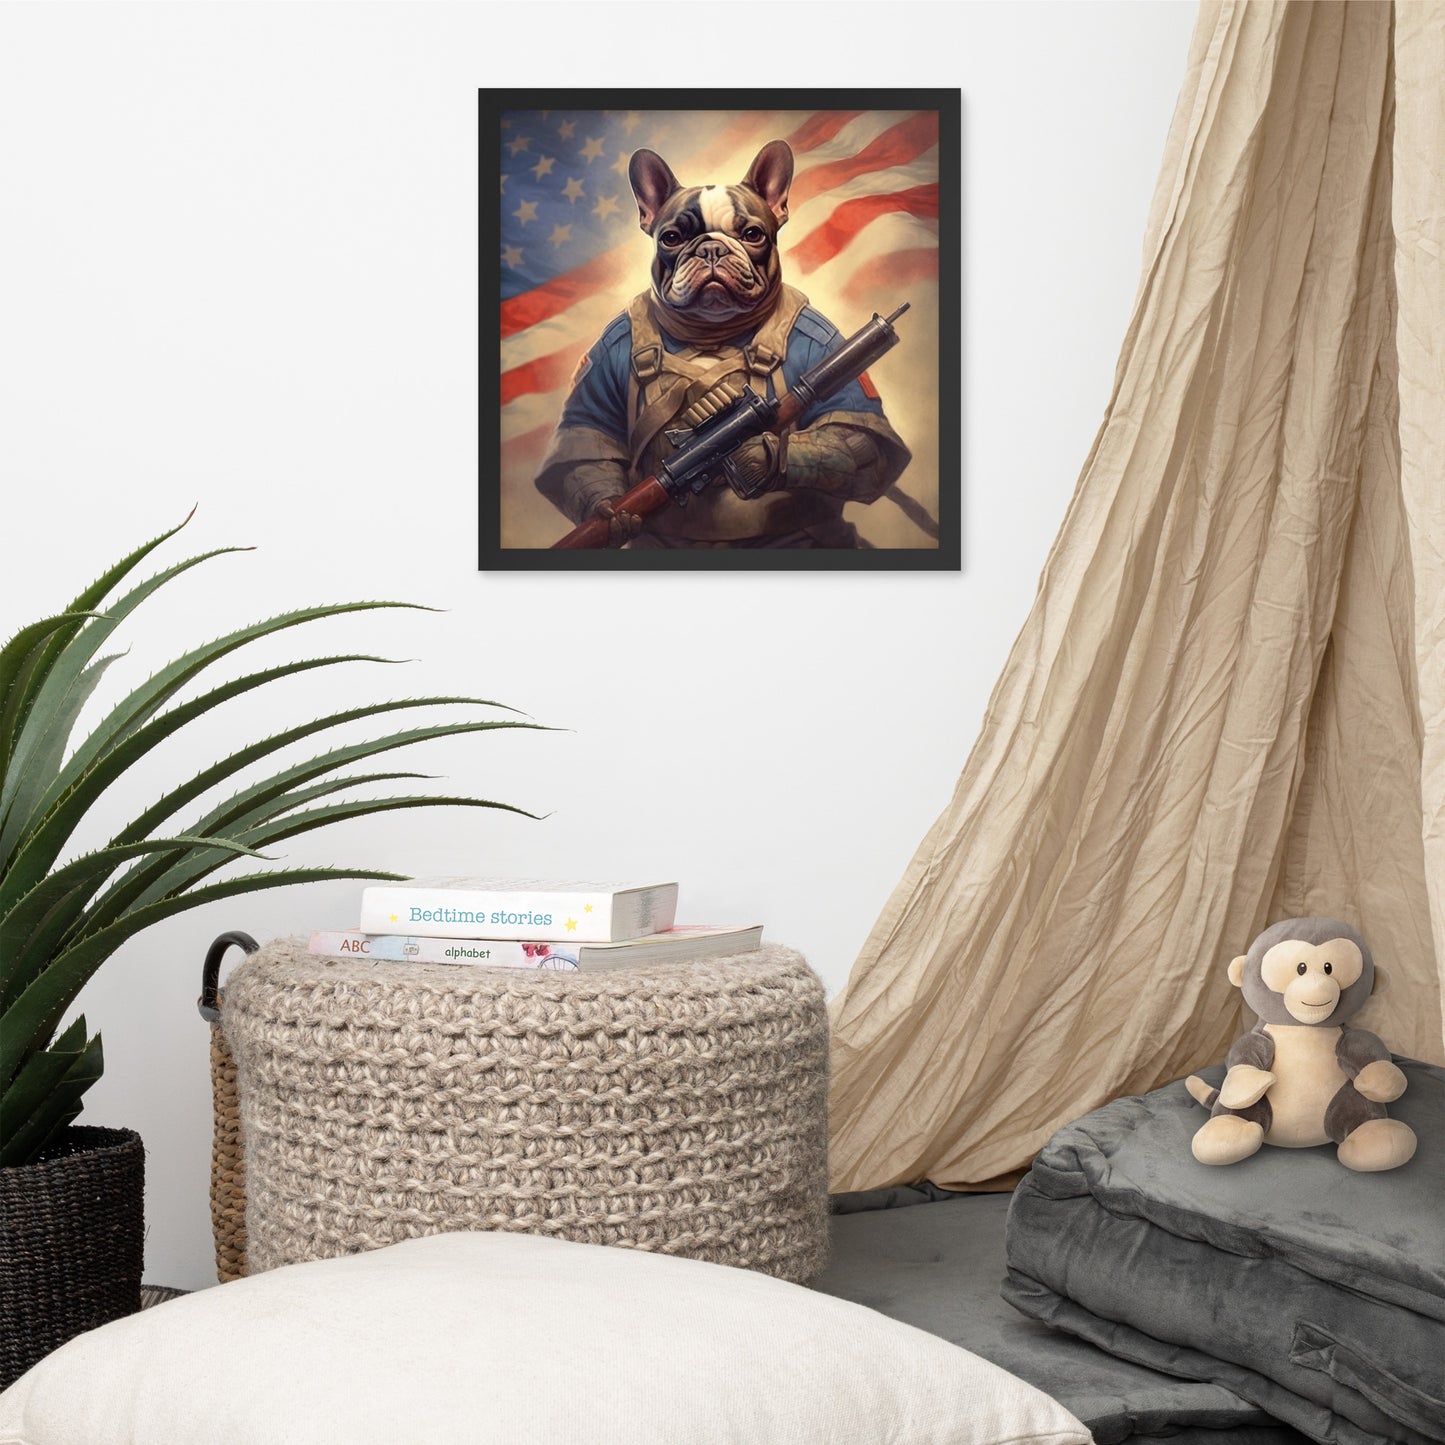 Soldier Frenchie Framed Poster - A Bravery and Artistic Choice for Pet Lovers and Country Force Admirers